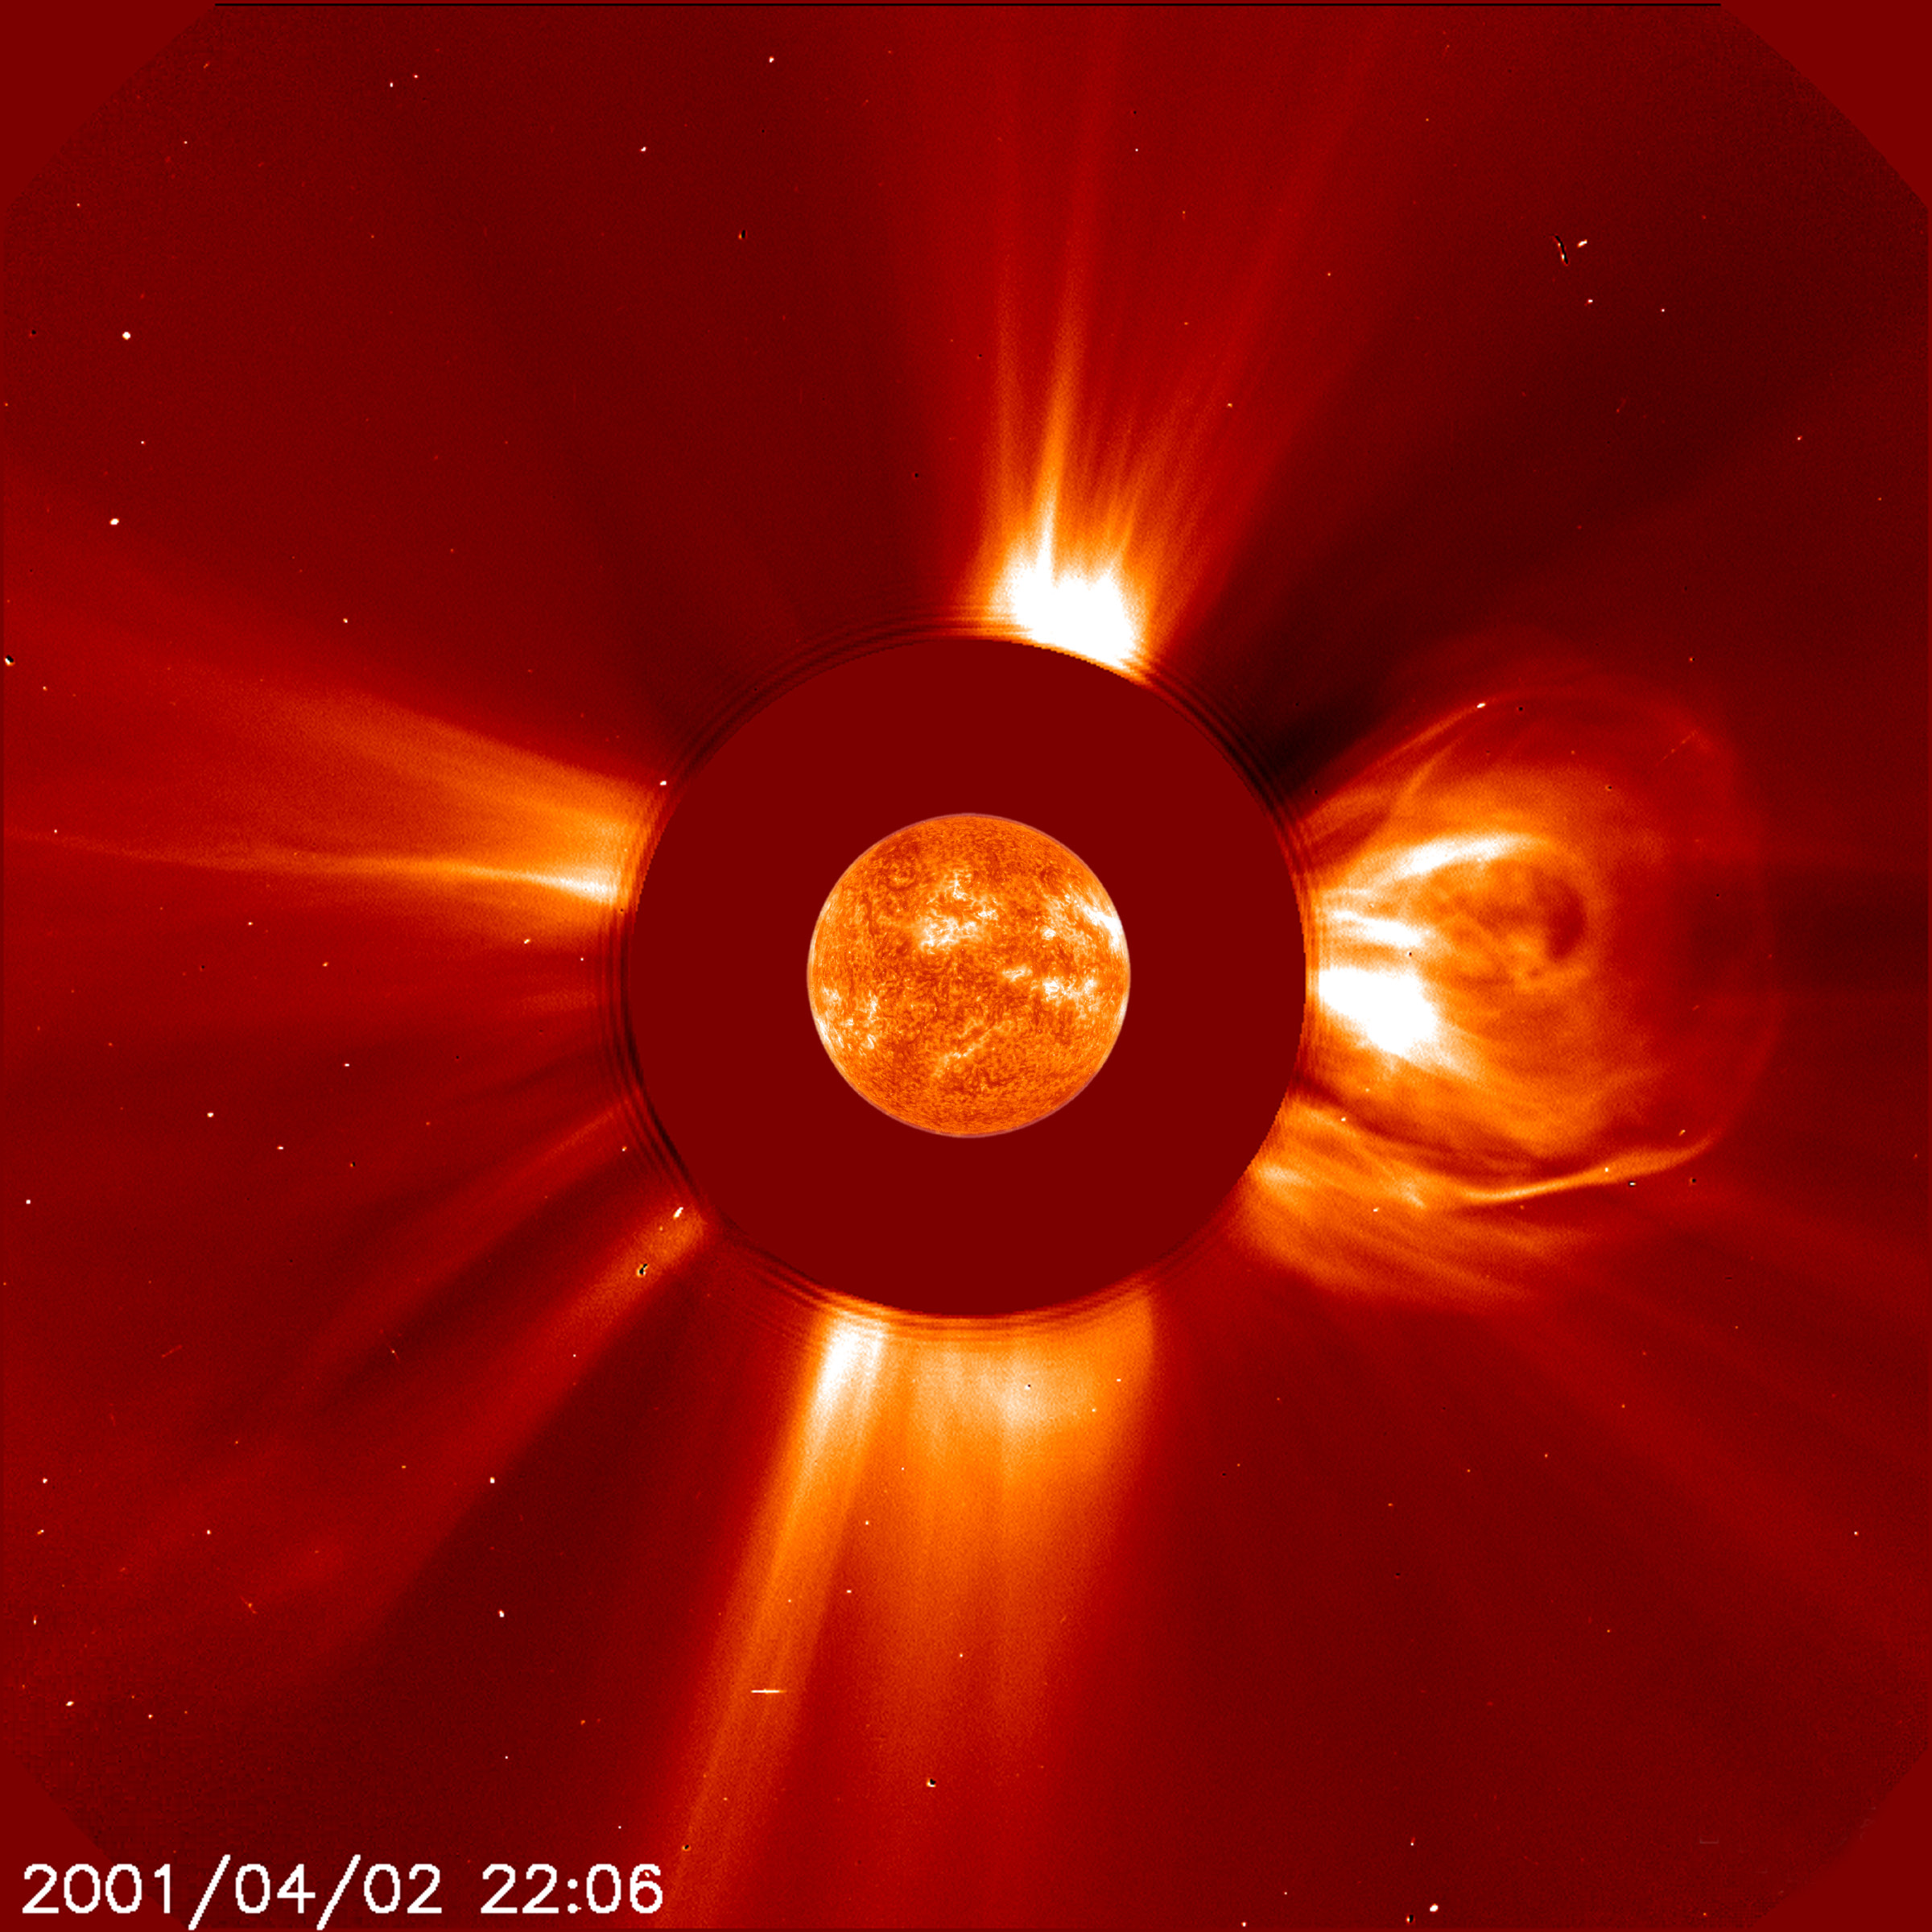 Biggest Solar Flare on Record : Image of the Day